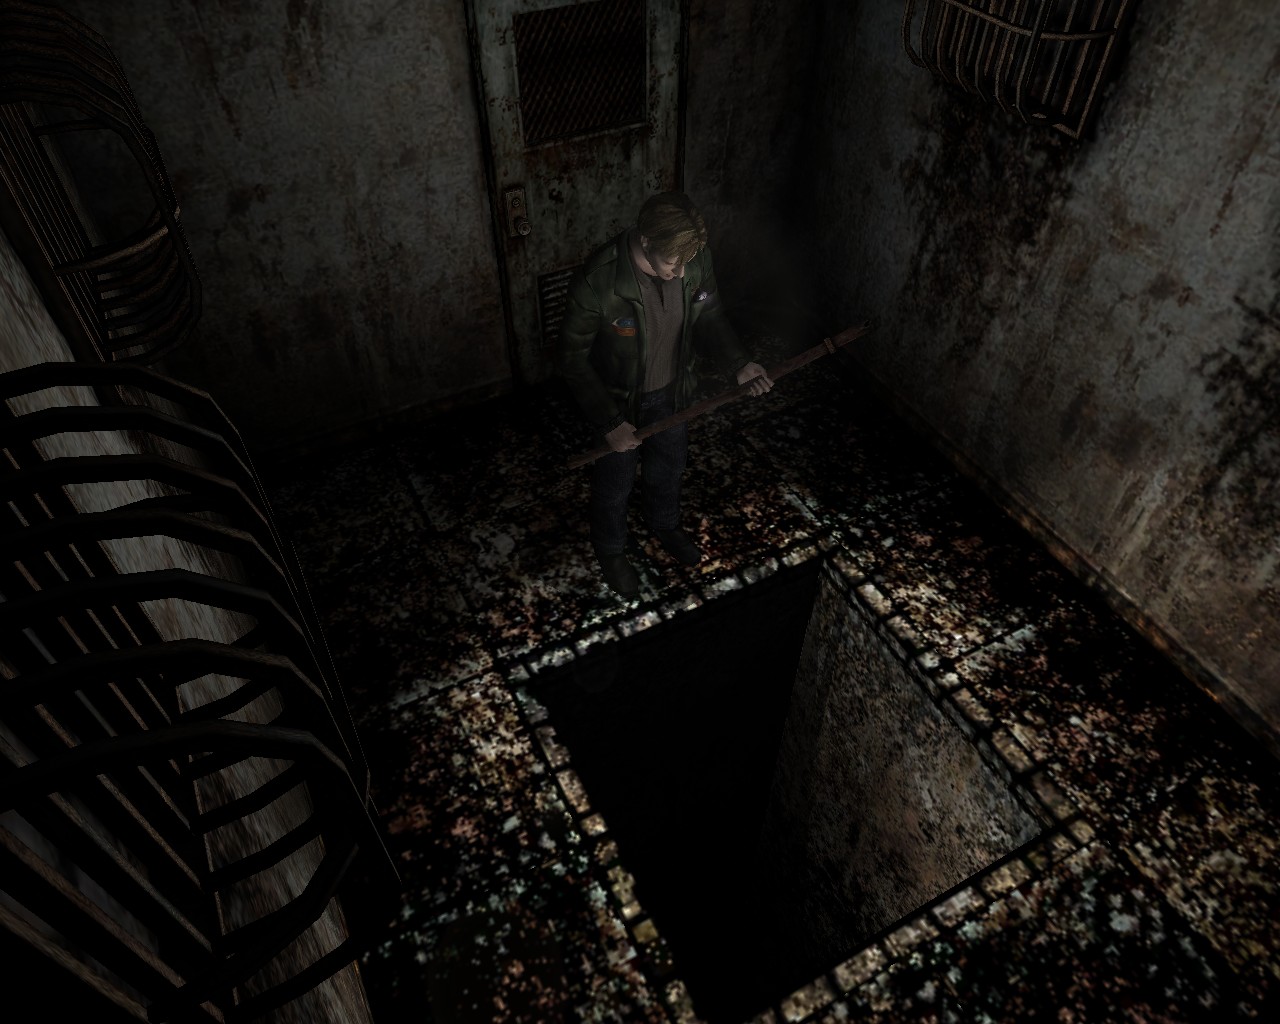 http://img3.wikia.nocookie.net/__cb20110920063009/silenthill/es/images/6/64/Prison_Hole1.jpg